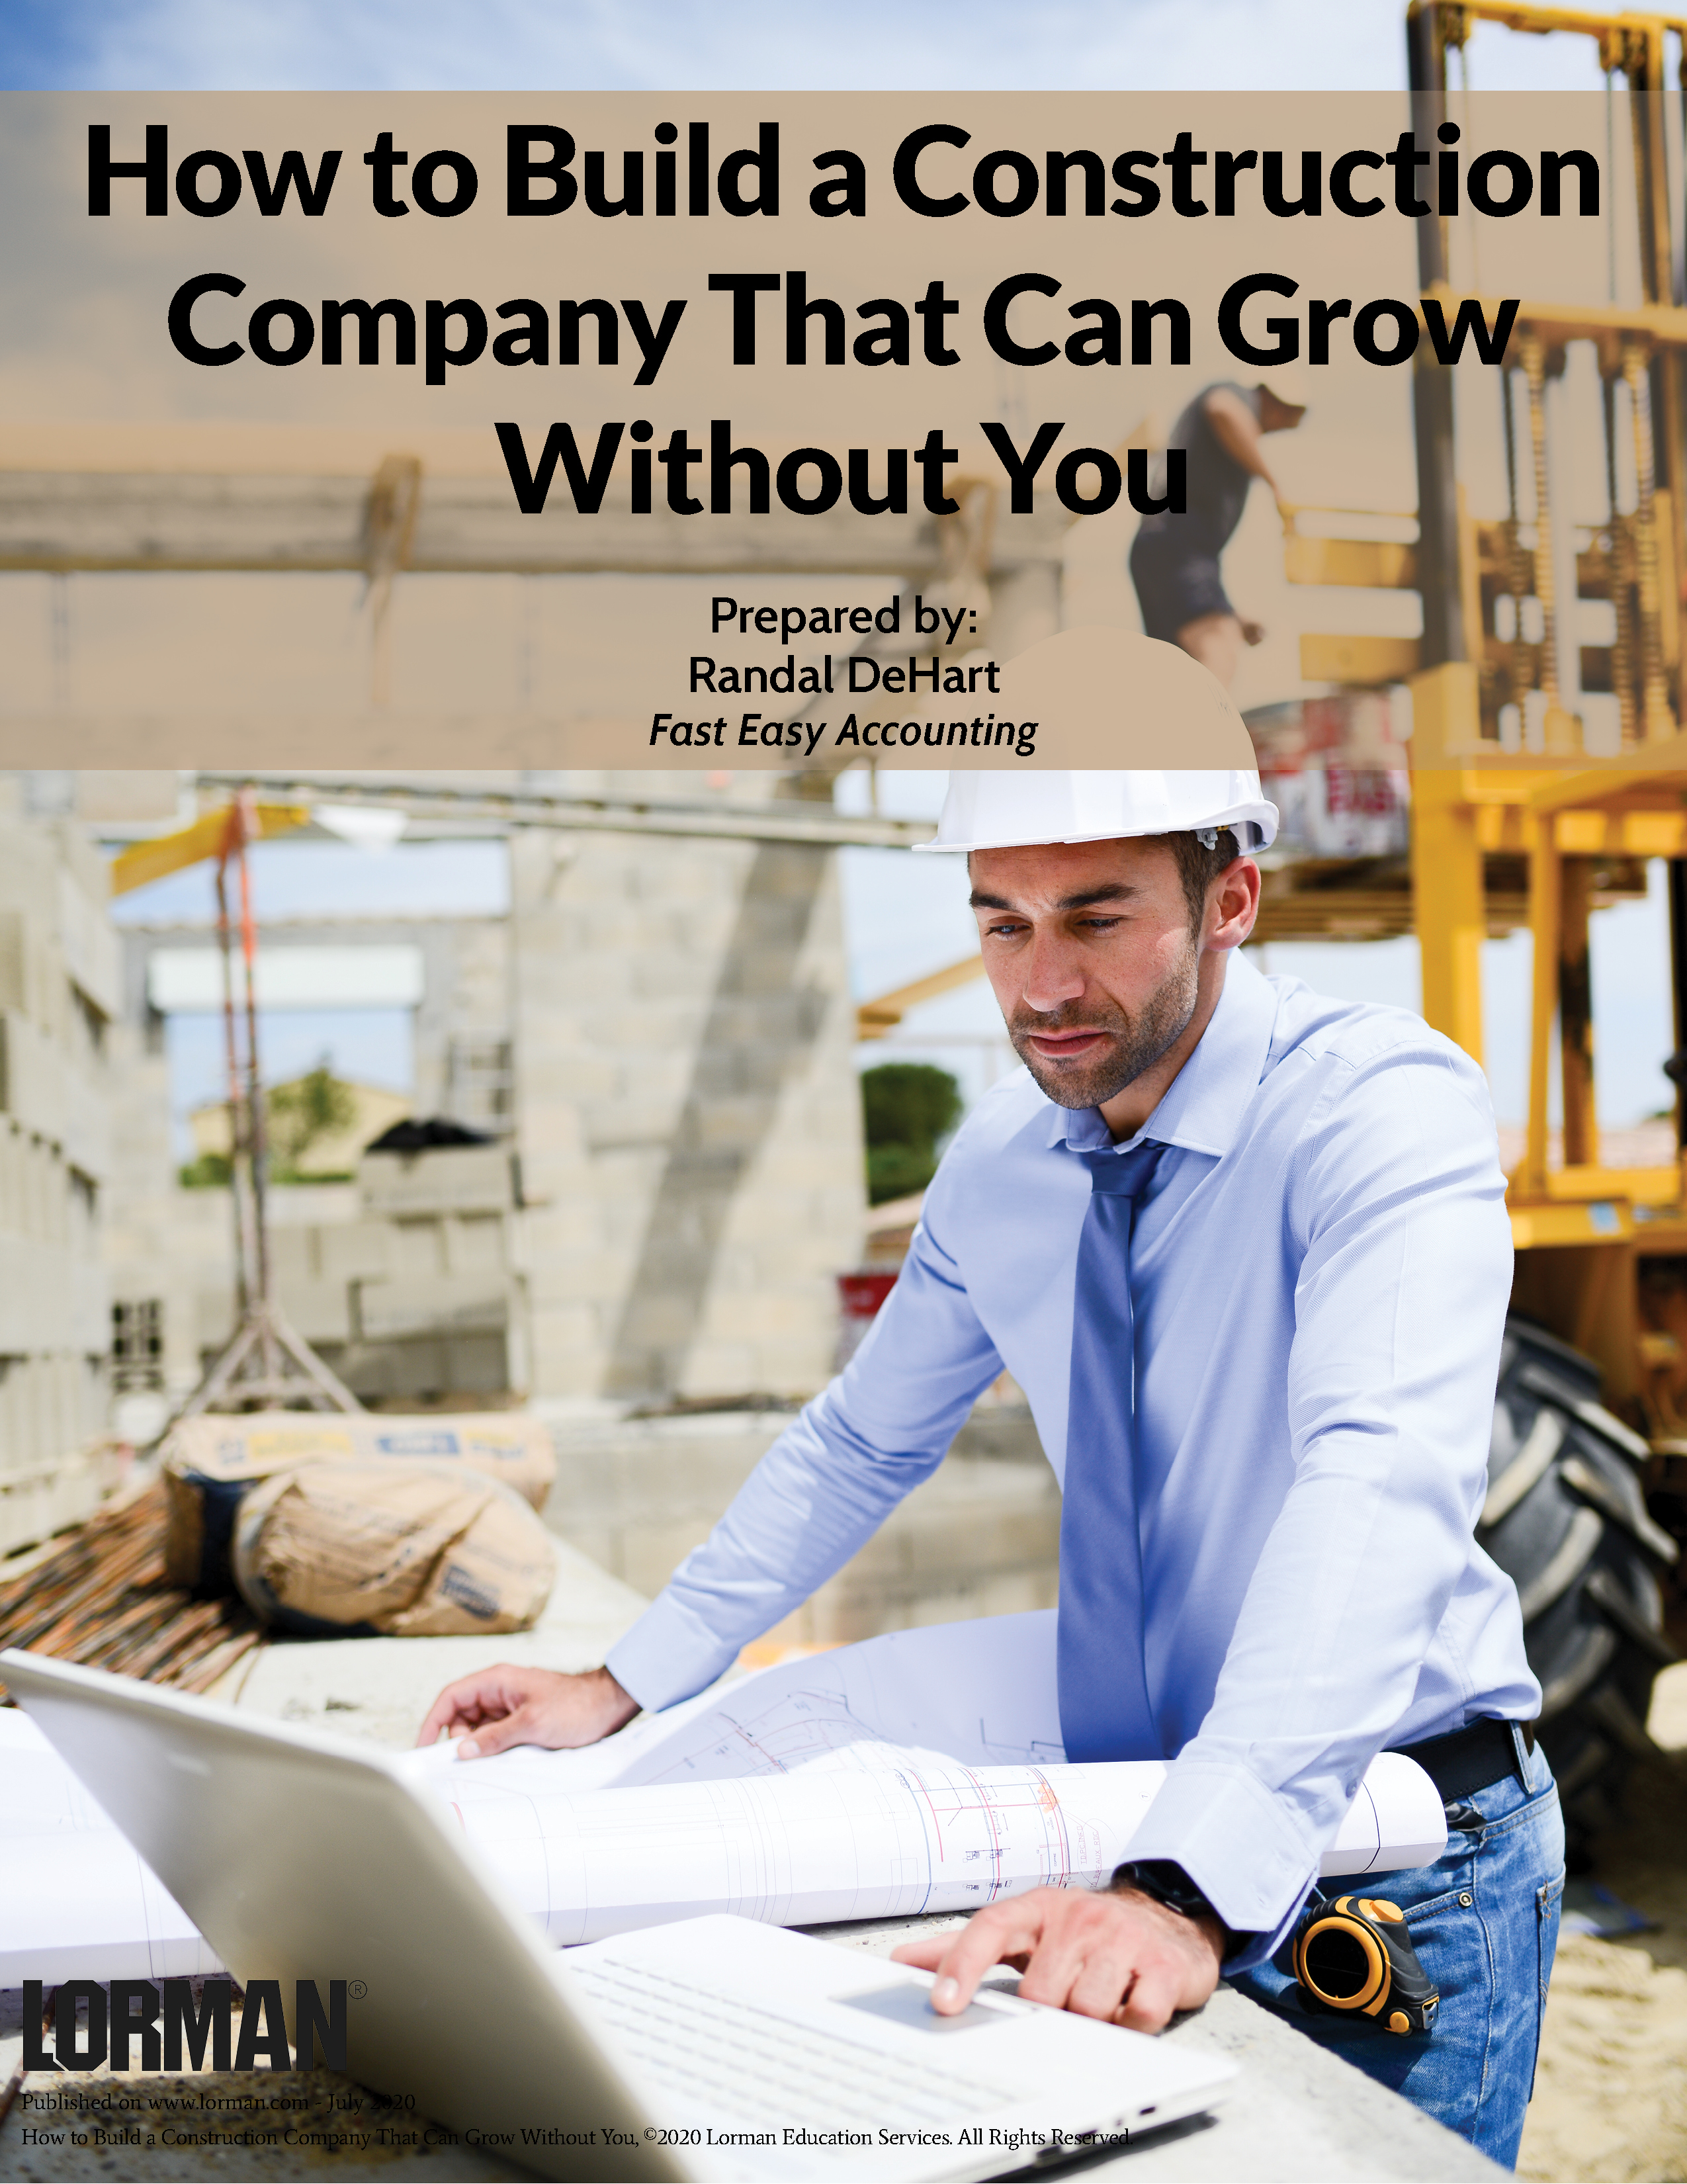 How to Build a Construction Company That Can Grow Without You